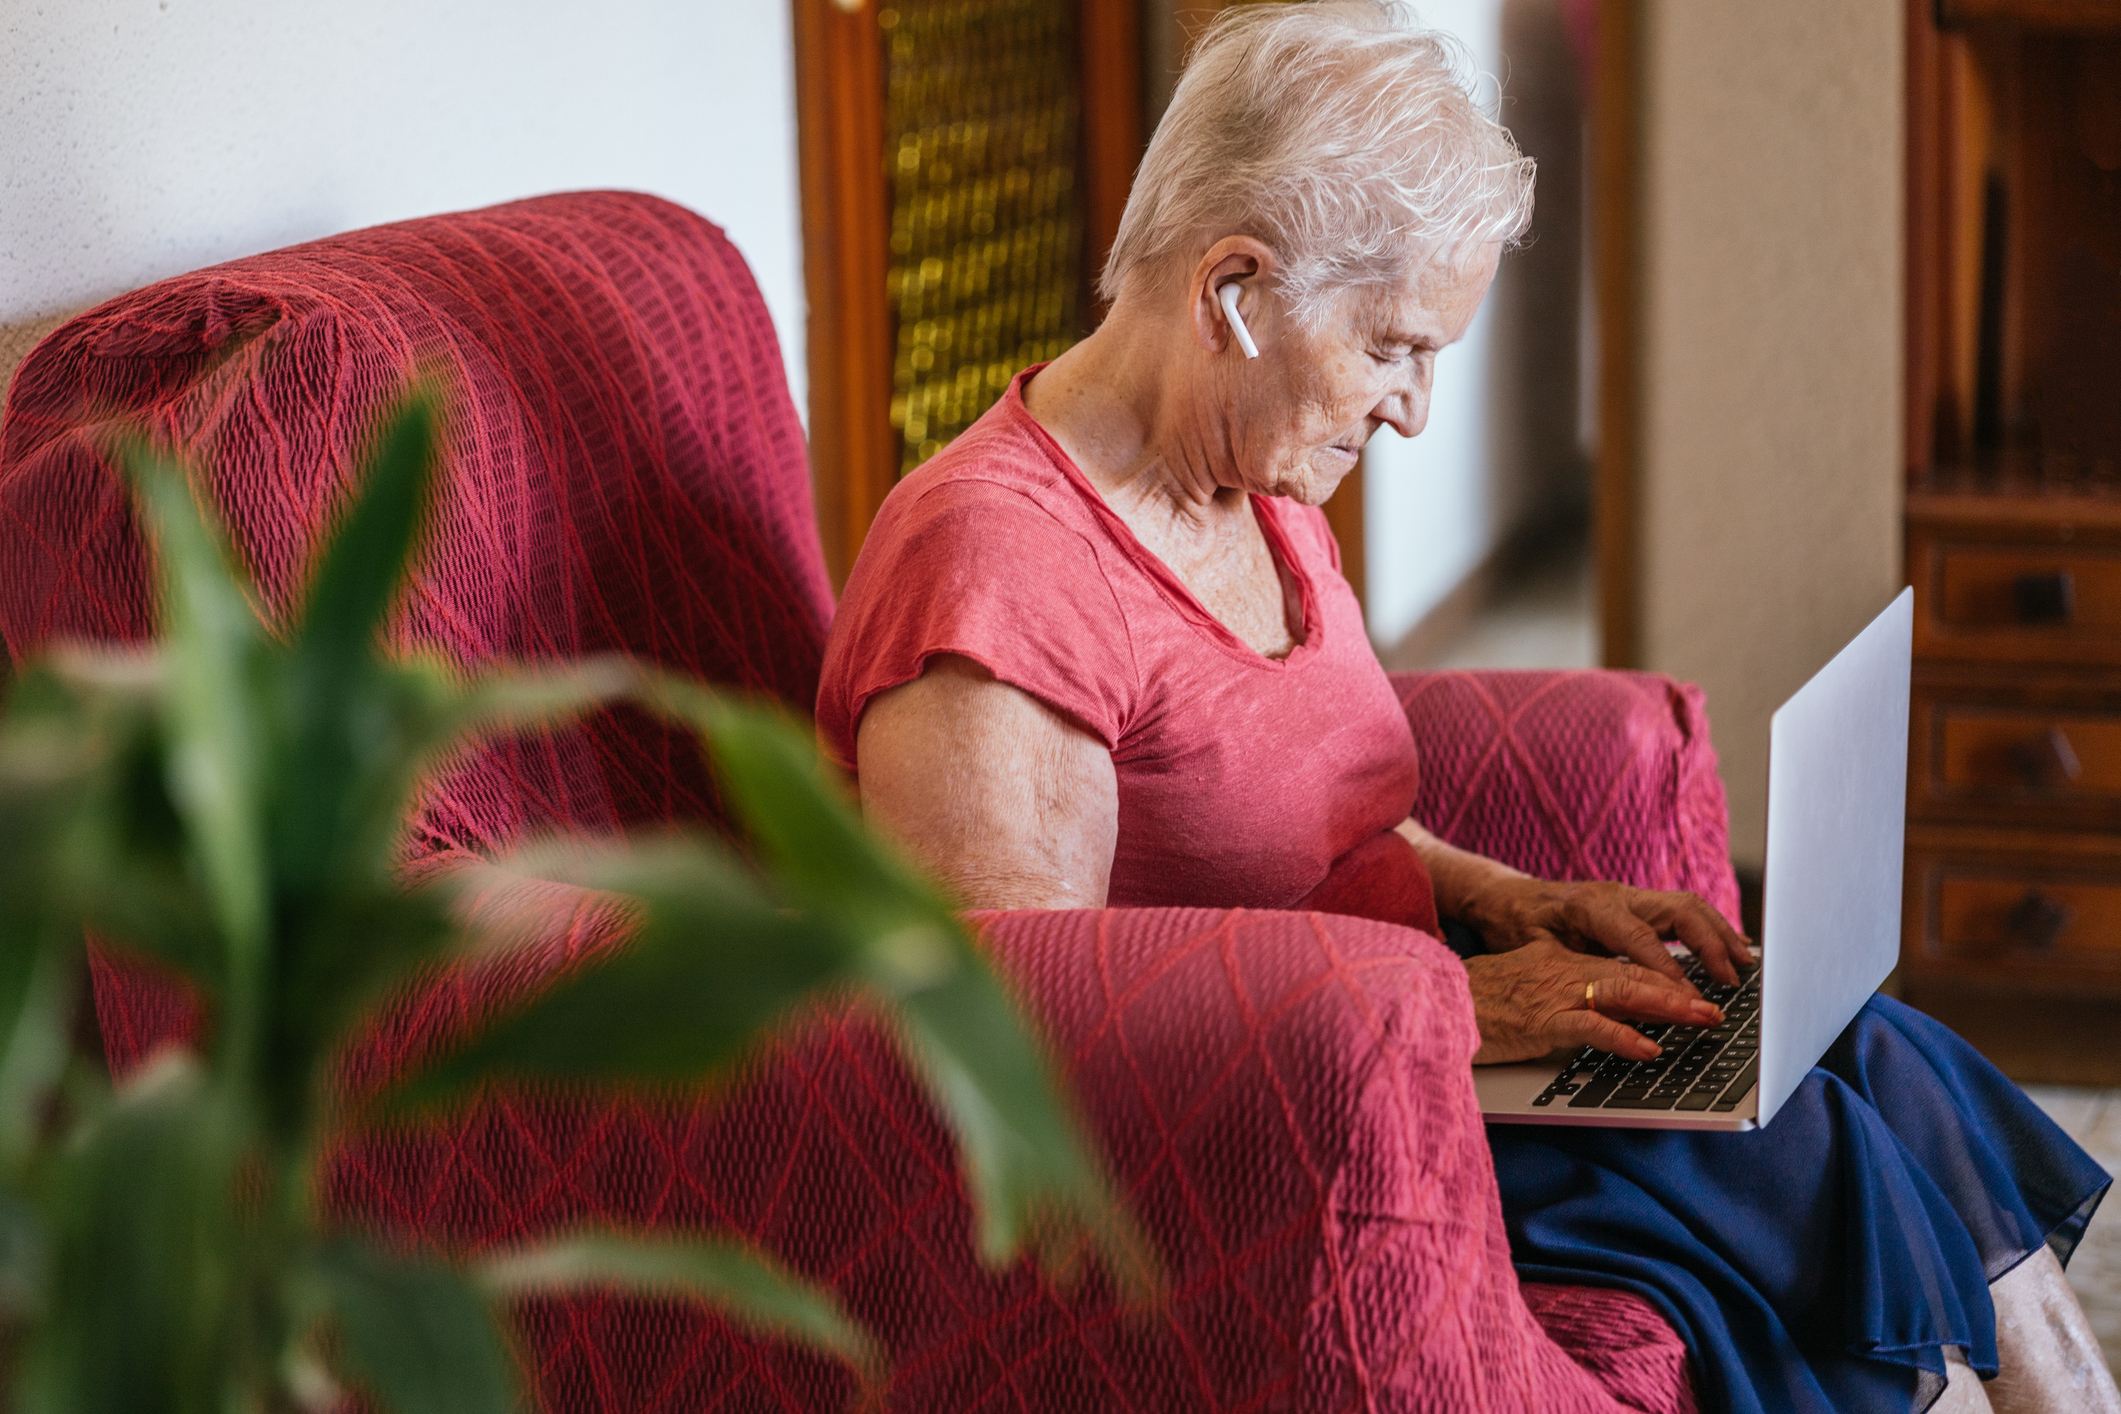 An elderly white woman with short, thin white hair and a red tee shirt sits in a red patterned armchair at home, reading articles on her laptop with white earbuds in.